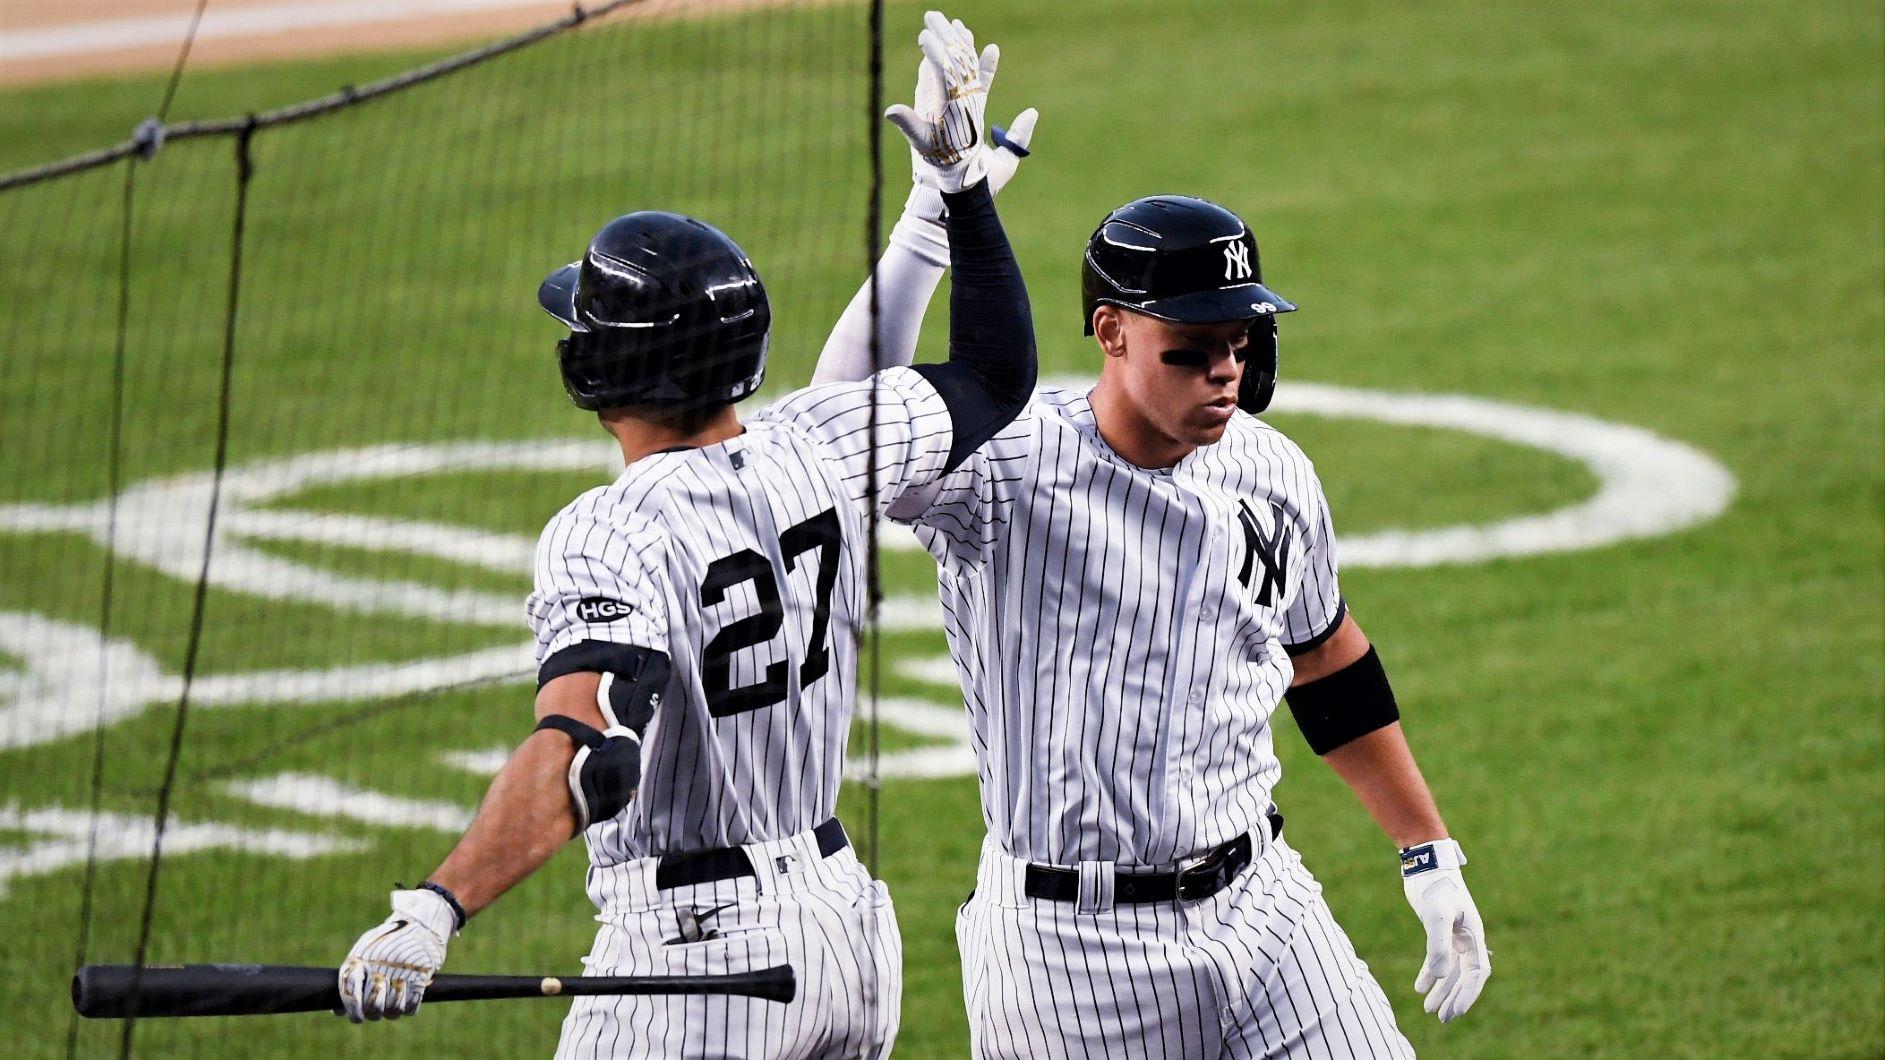 New York Yankees right fielder Aaron Judge (99) celebrates with Giancarlo Stanton (27) after Judge's two-run homer in the third inning. The Yankees host the Boston Red Sox in their home opener at Yankee Stadium on Friday, July 31, 2020, in New York. Yanks Home Opener / © Danielle Parhizkaran/NorthJersey.com via Imagn Content Services, LLC